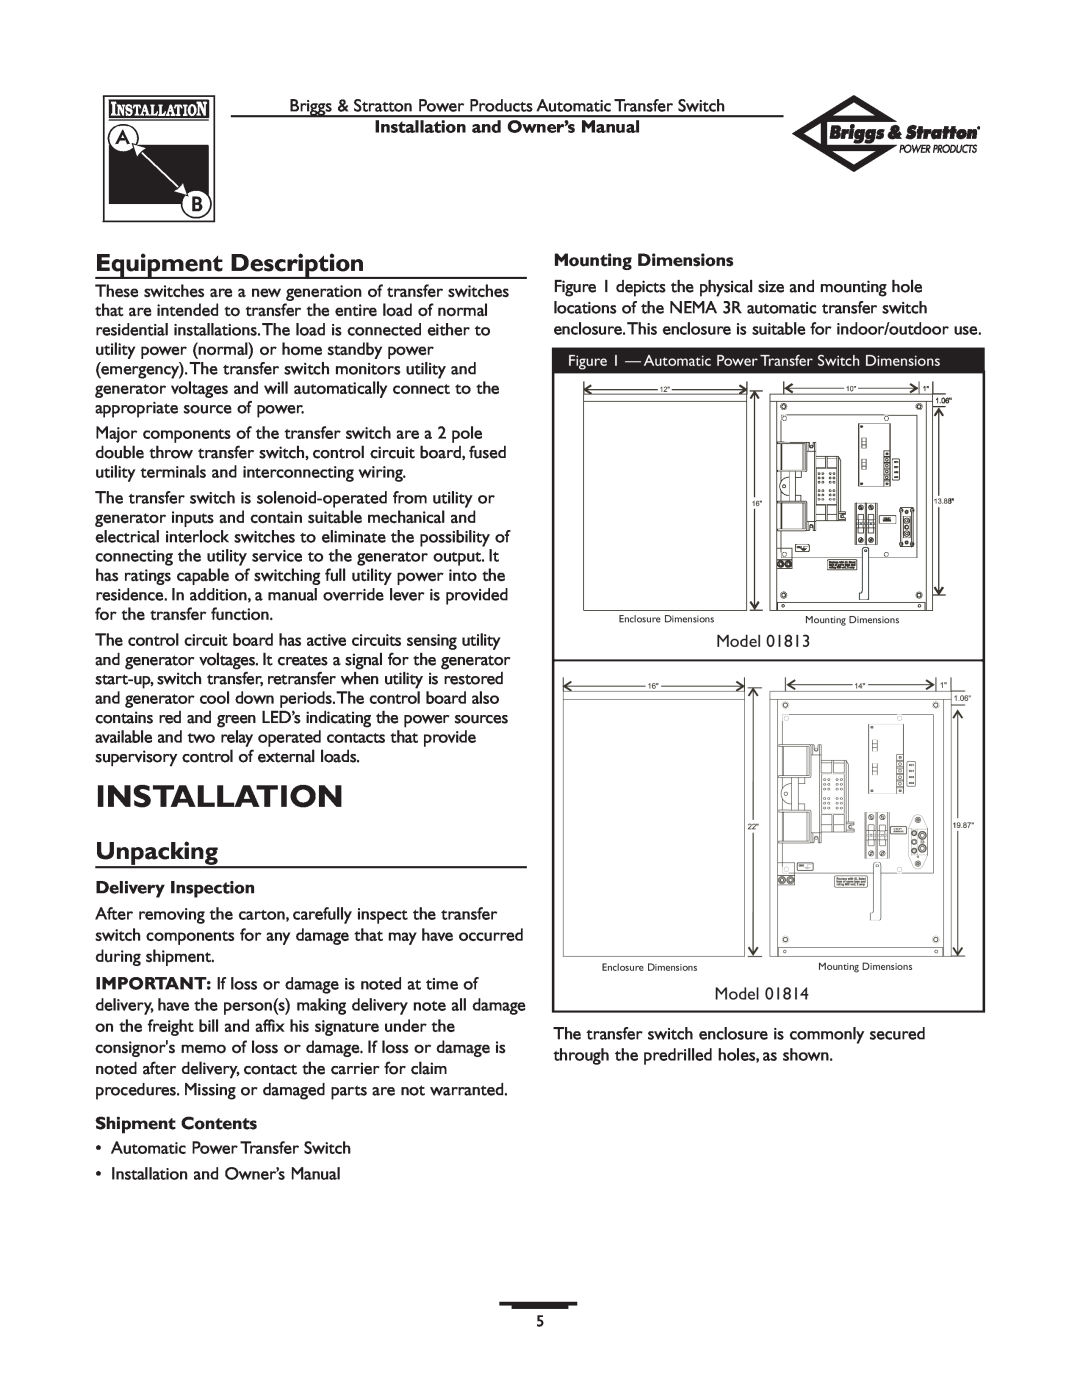 Briggs & Stratton 01813-0 Installation, Equipment Description, Unpacking, Mounting Dimensions, Delivery Inspection 